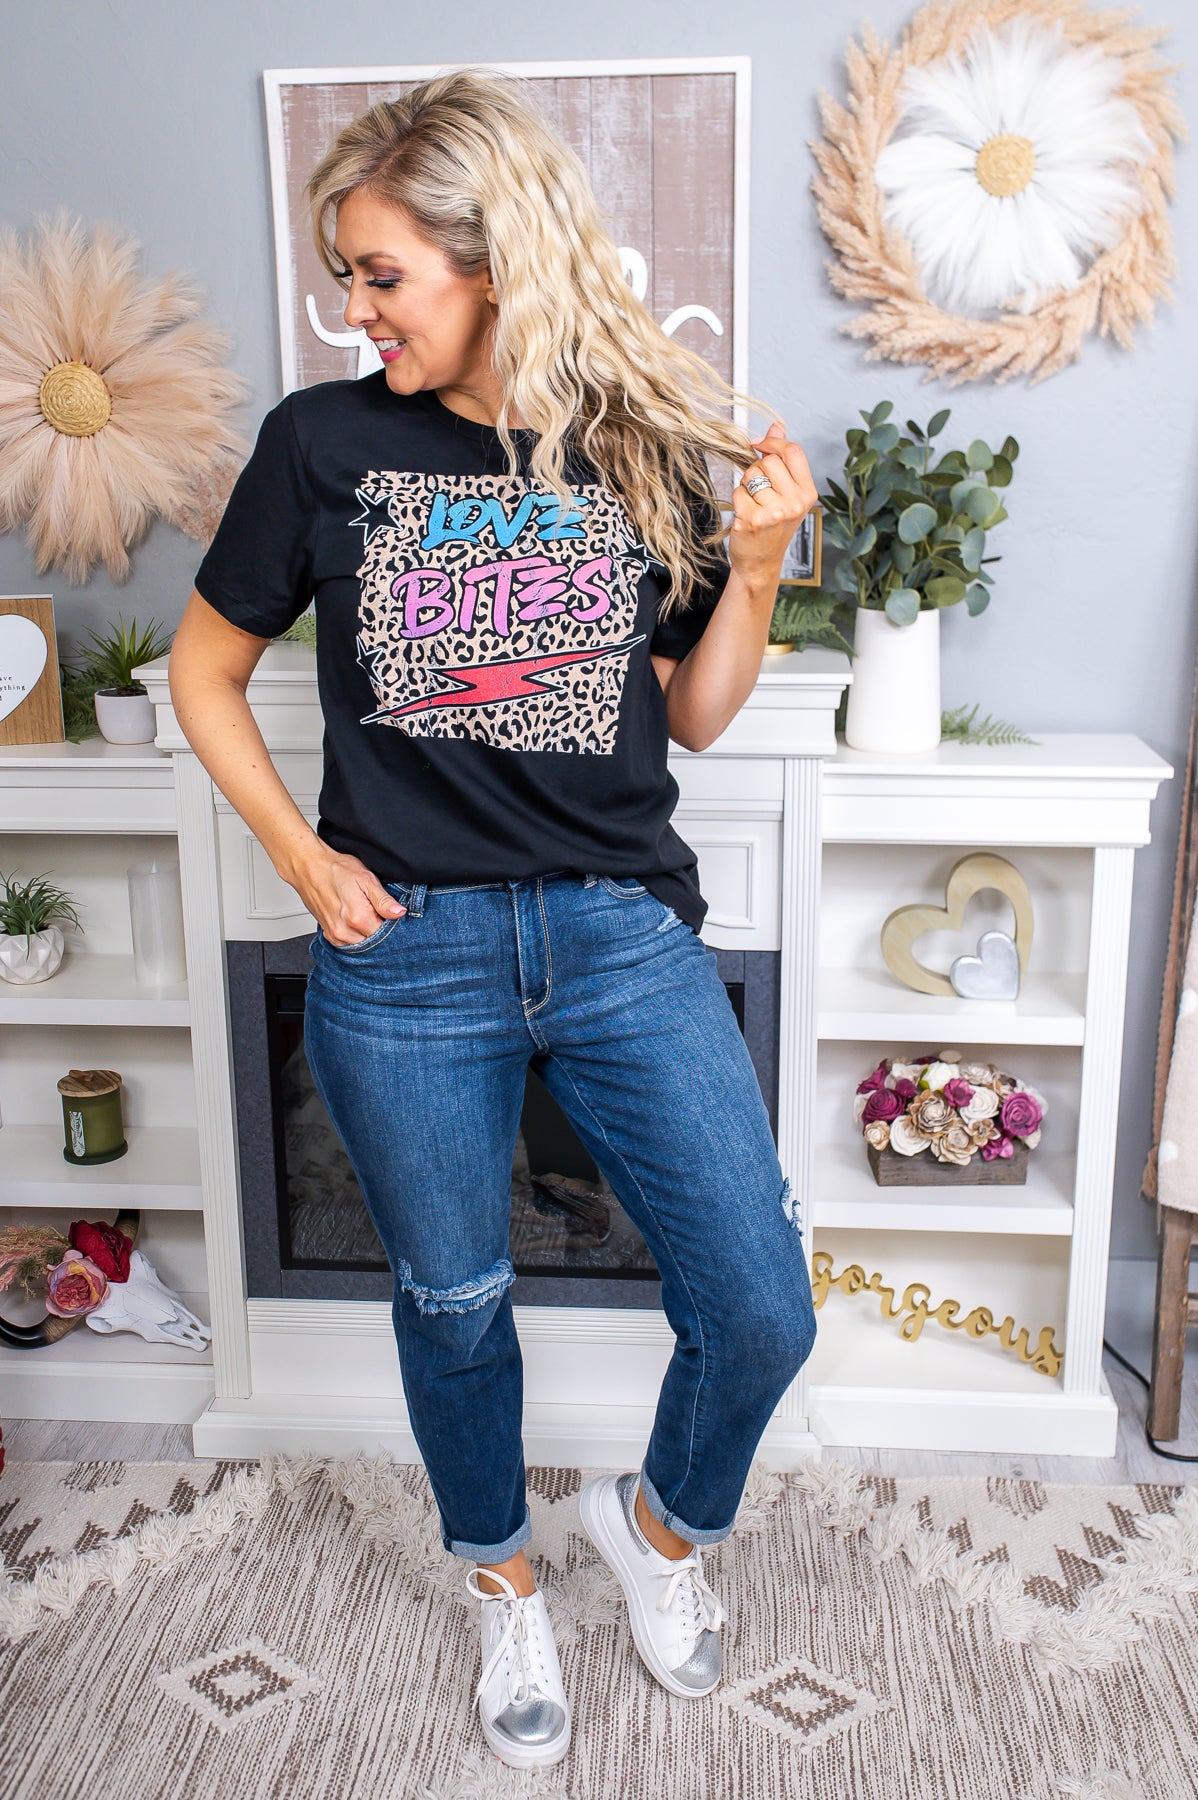 Love Bites Solid Black Printed Graphic Tee - A2506BK